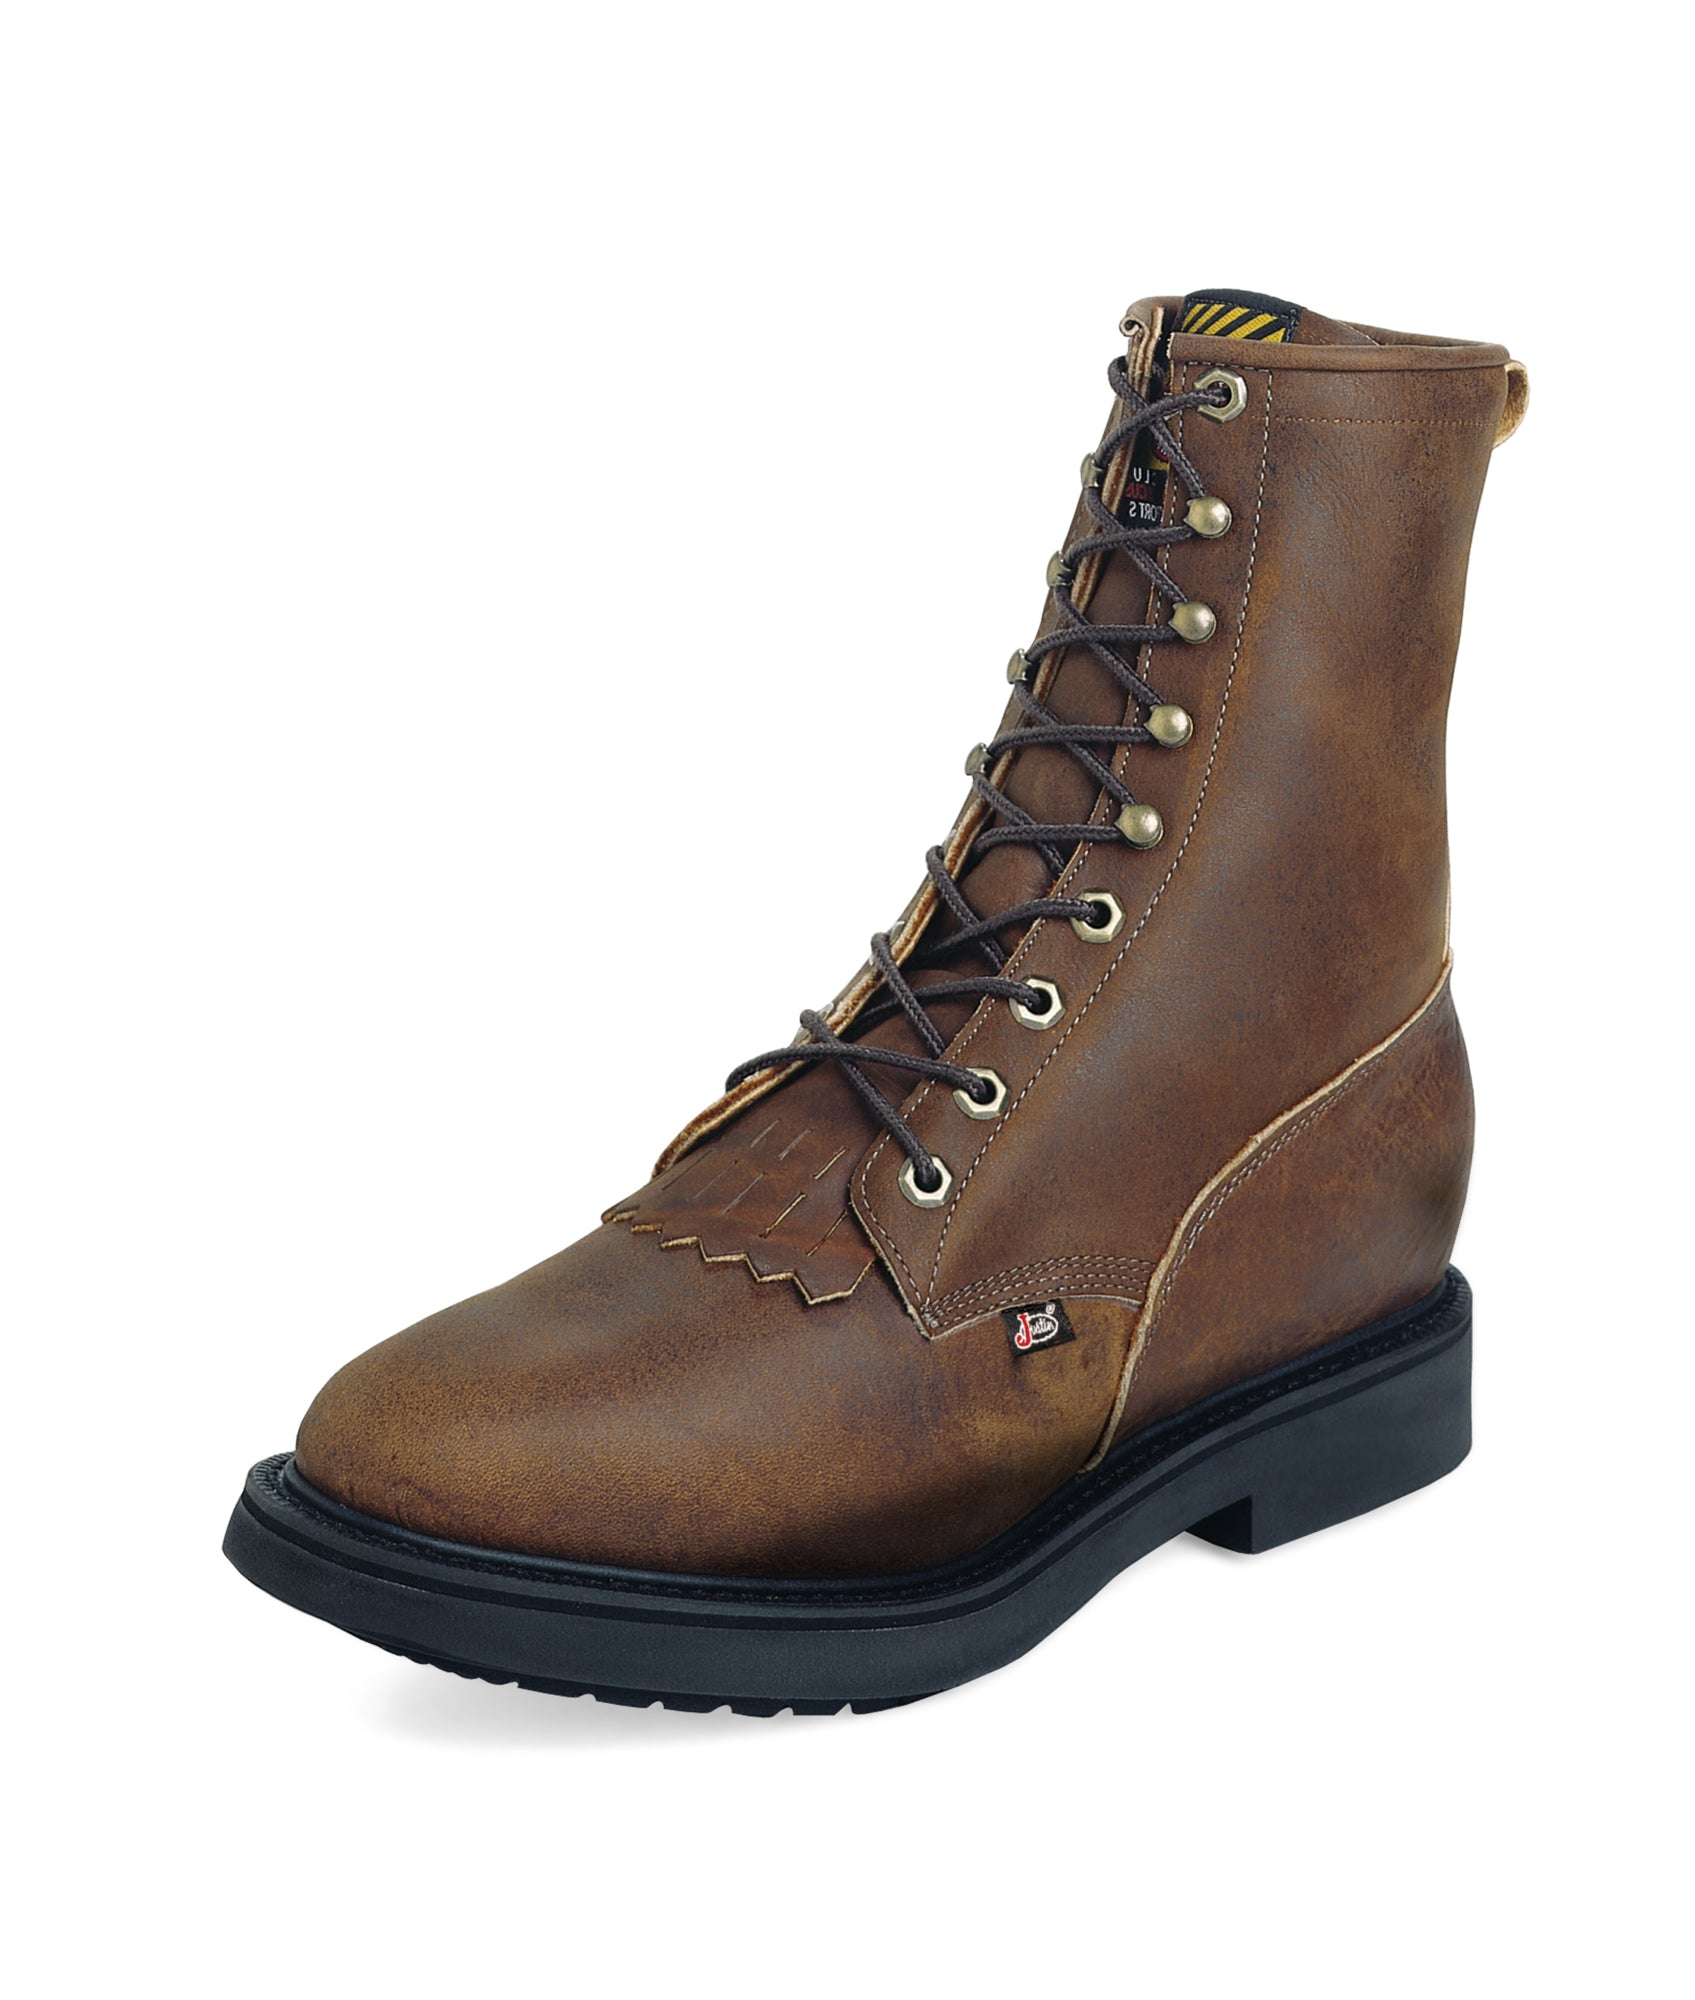 Justin Mens Bark Leather Work Boots 